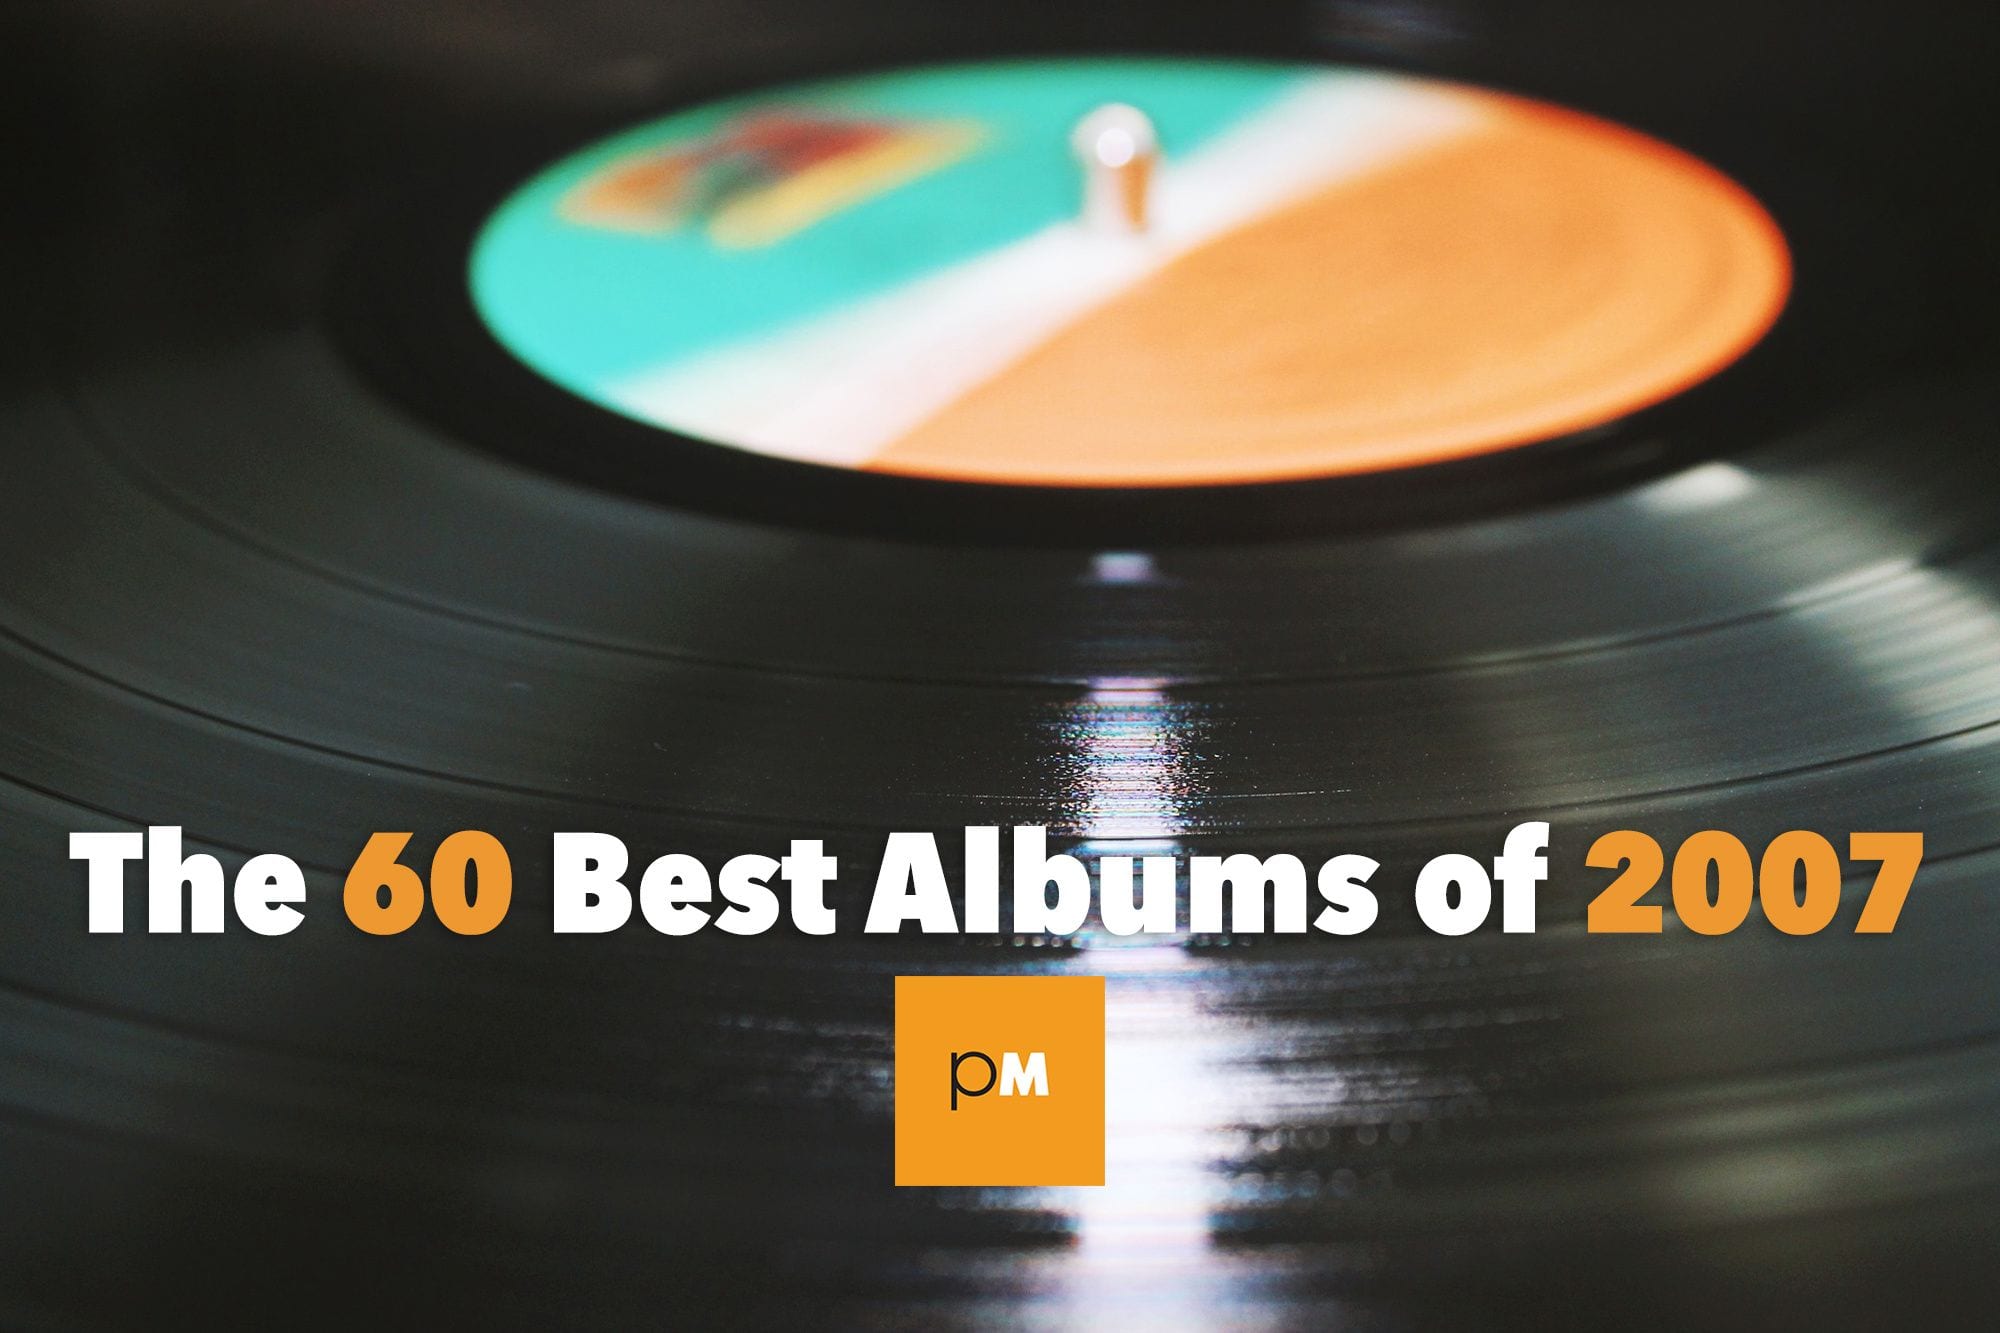 The 60 Best Albums of 2007